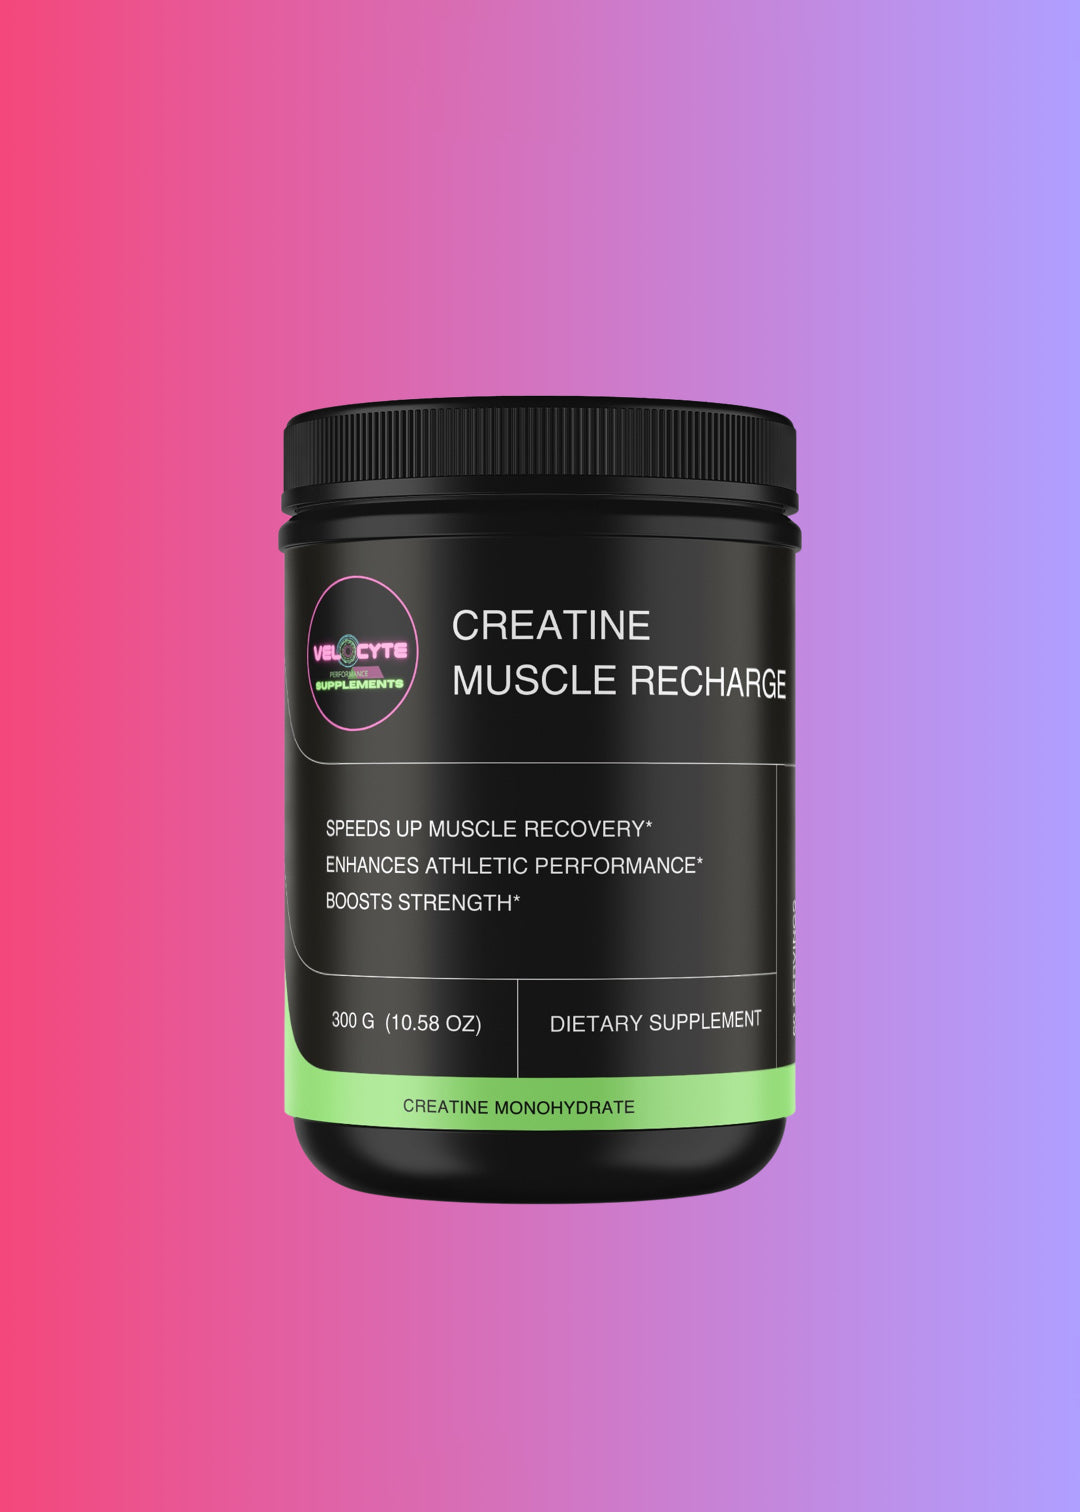 Creatine Muscle Recharge